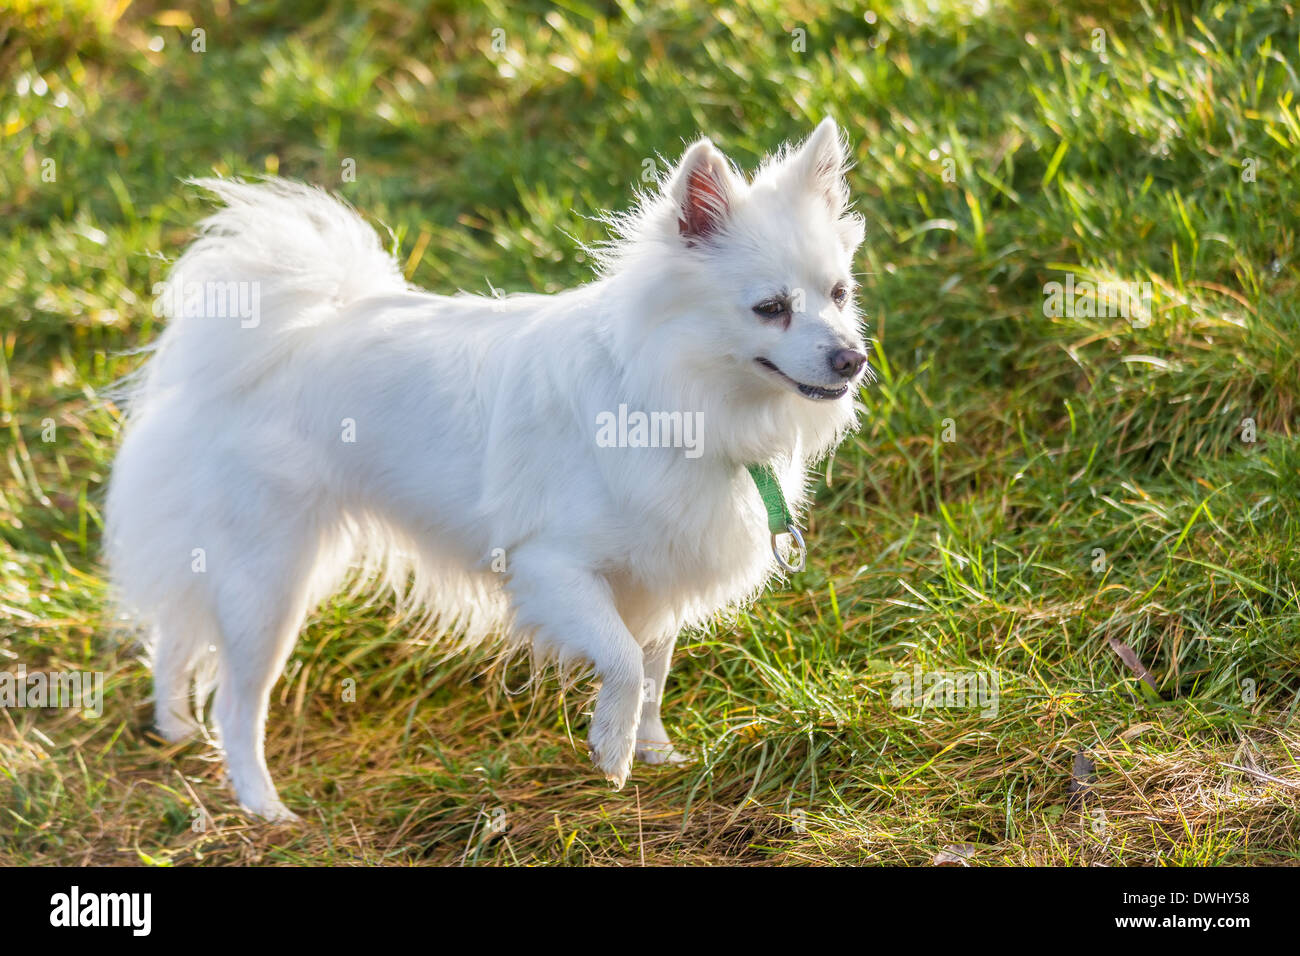 White Pomeranian High Resolution Stock Photography and Images - Alamy